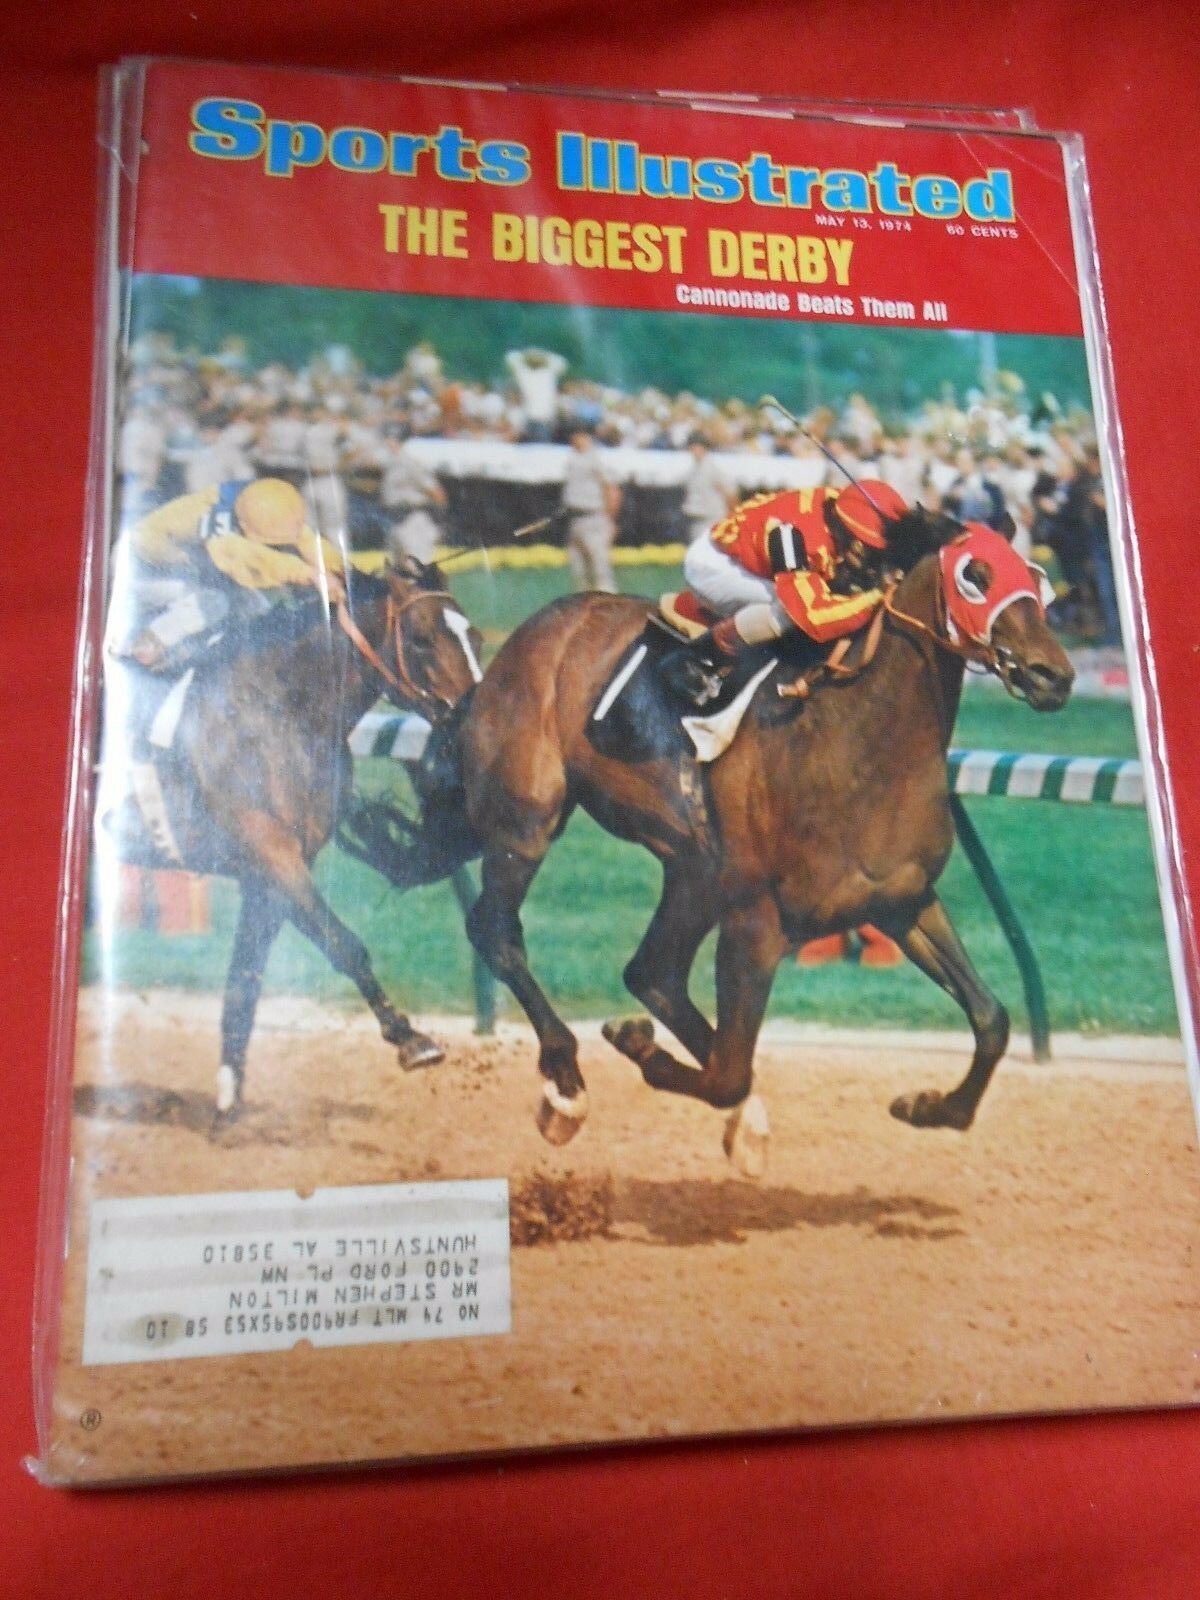 Primary image for SPORTS ILLUSTRATED May 13,1974 THE BIGGEST DERBY Cannonade Beats Them All